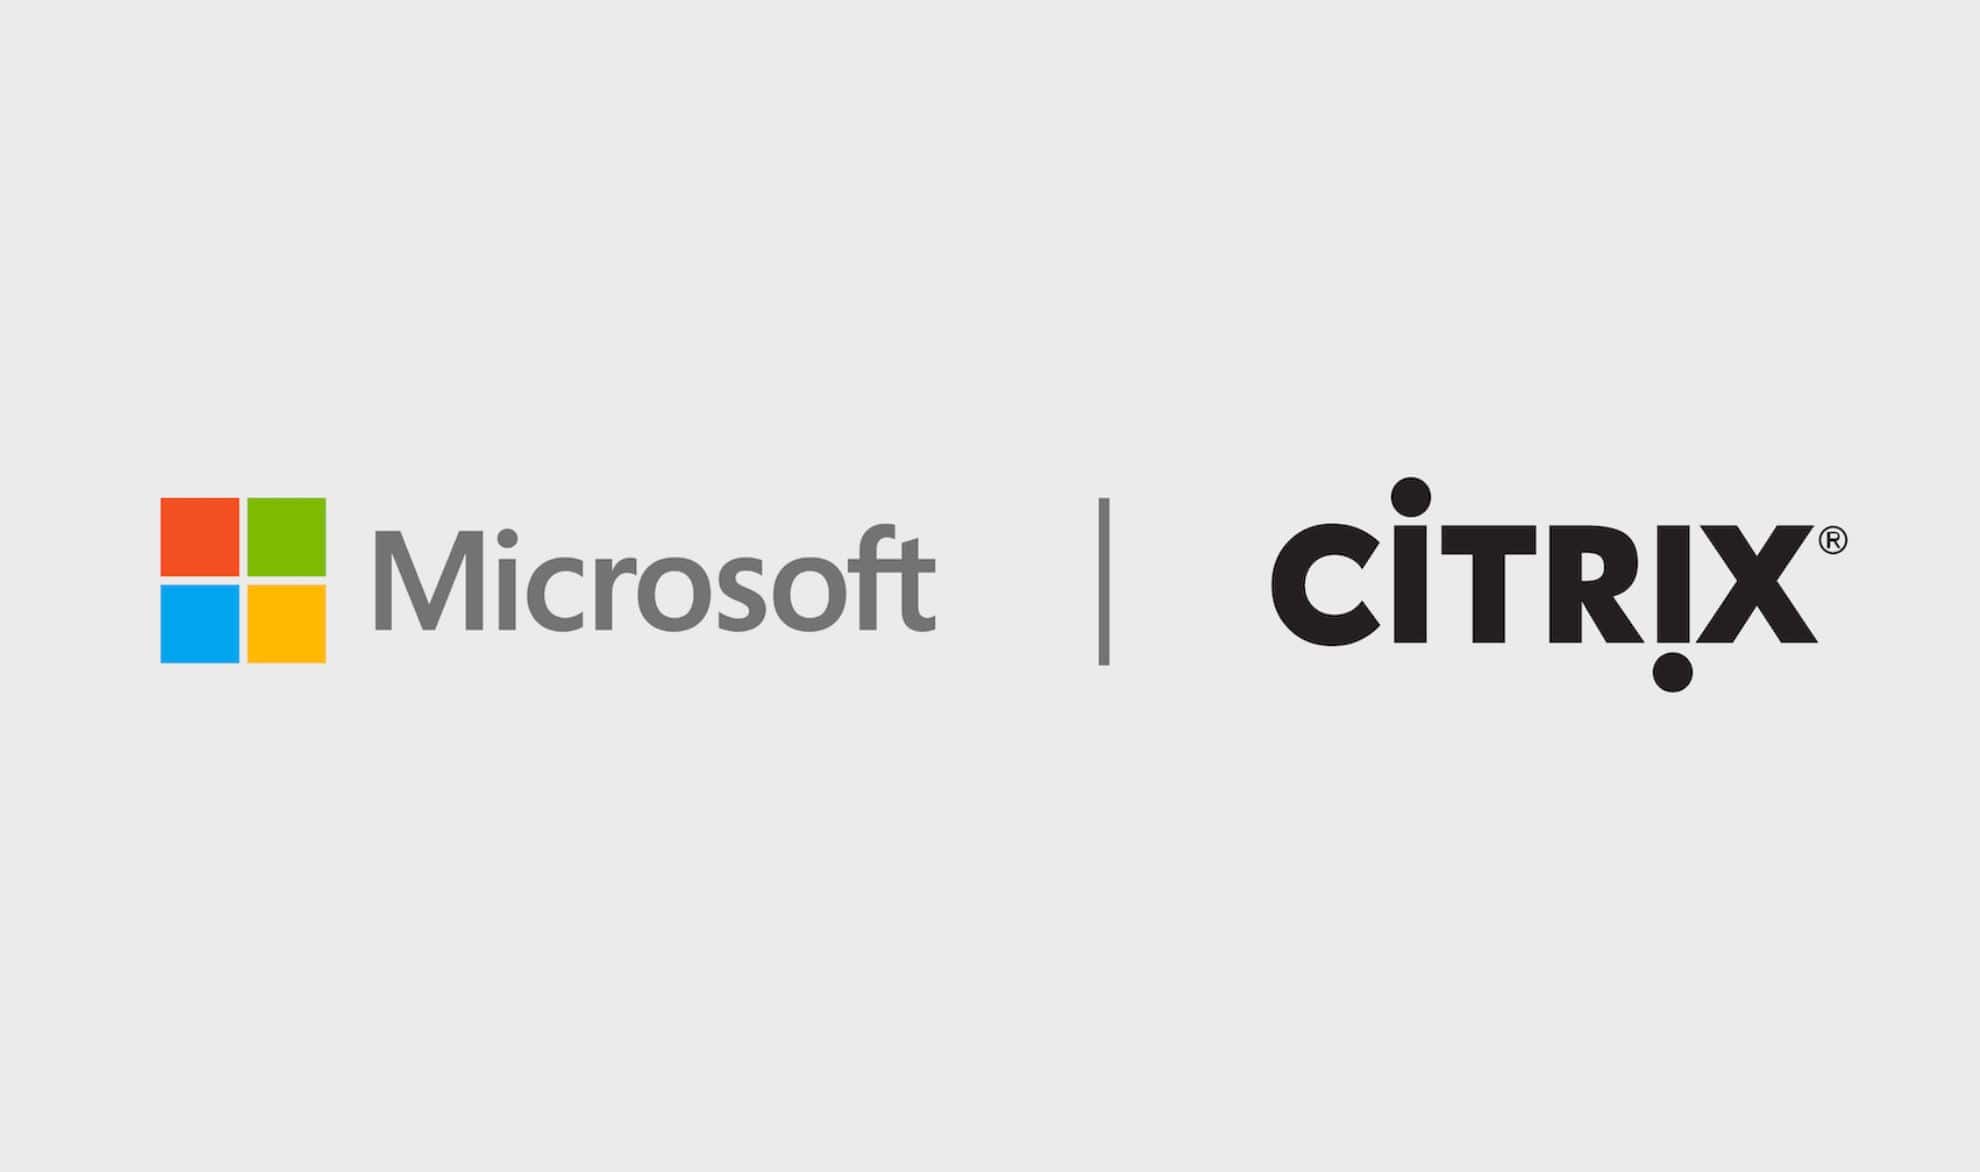 Microsoft and Citrix announce new cloud partnership, on-premises Citrix customers will be moved to Azure